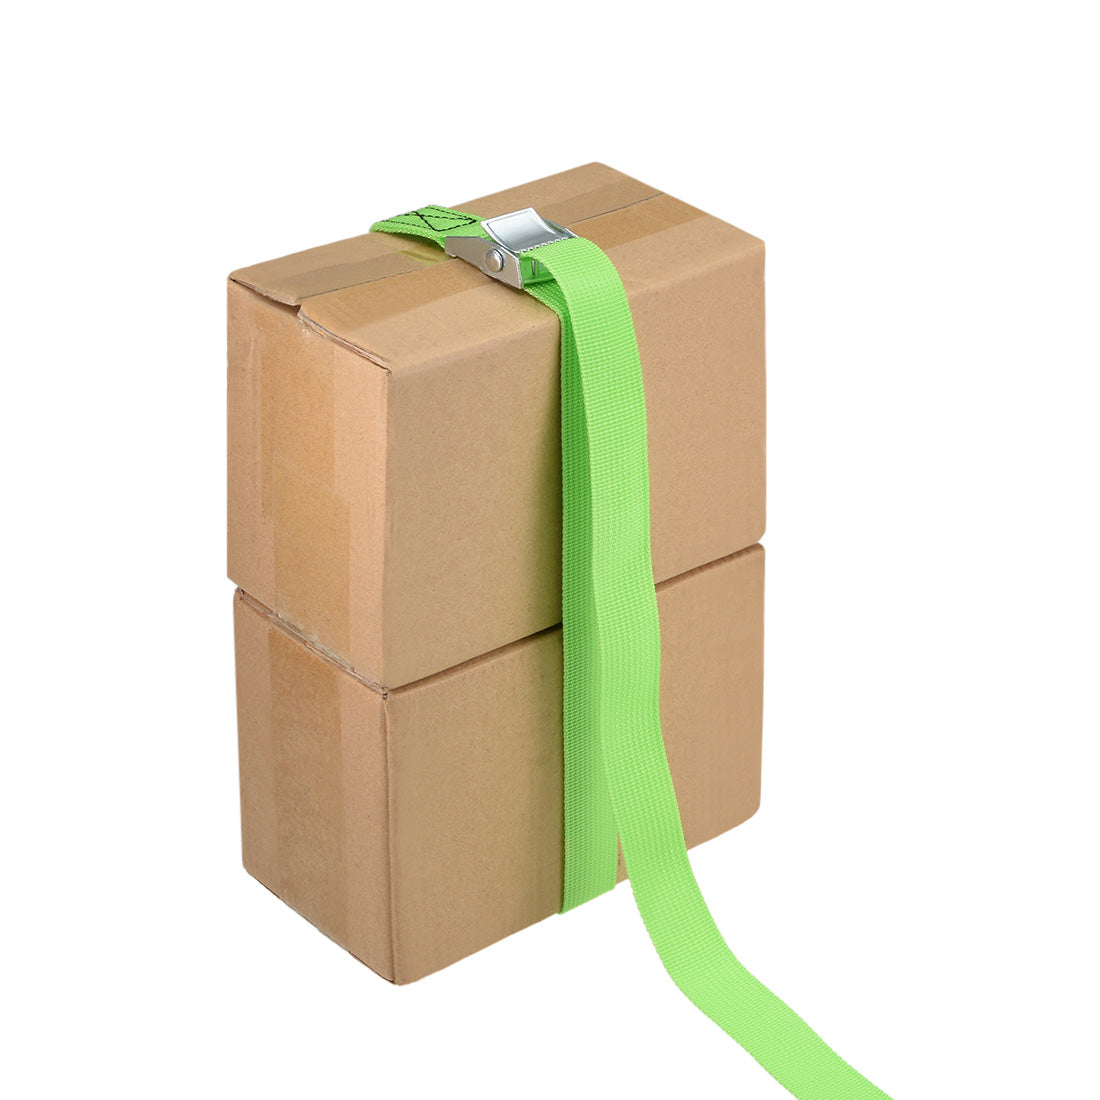 uxcell Uxcell Lashing Strap 1" x 39' Cargo Tie Down Straps with Cam Lock Buckle Up to 551lbs Green 2pcs